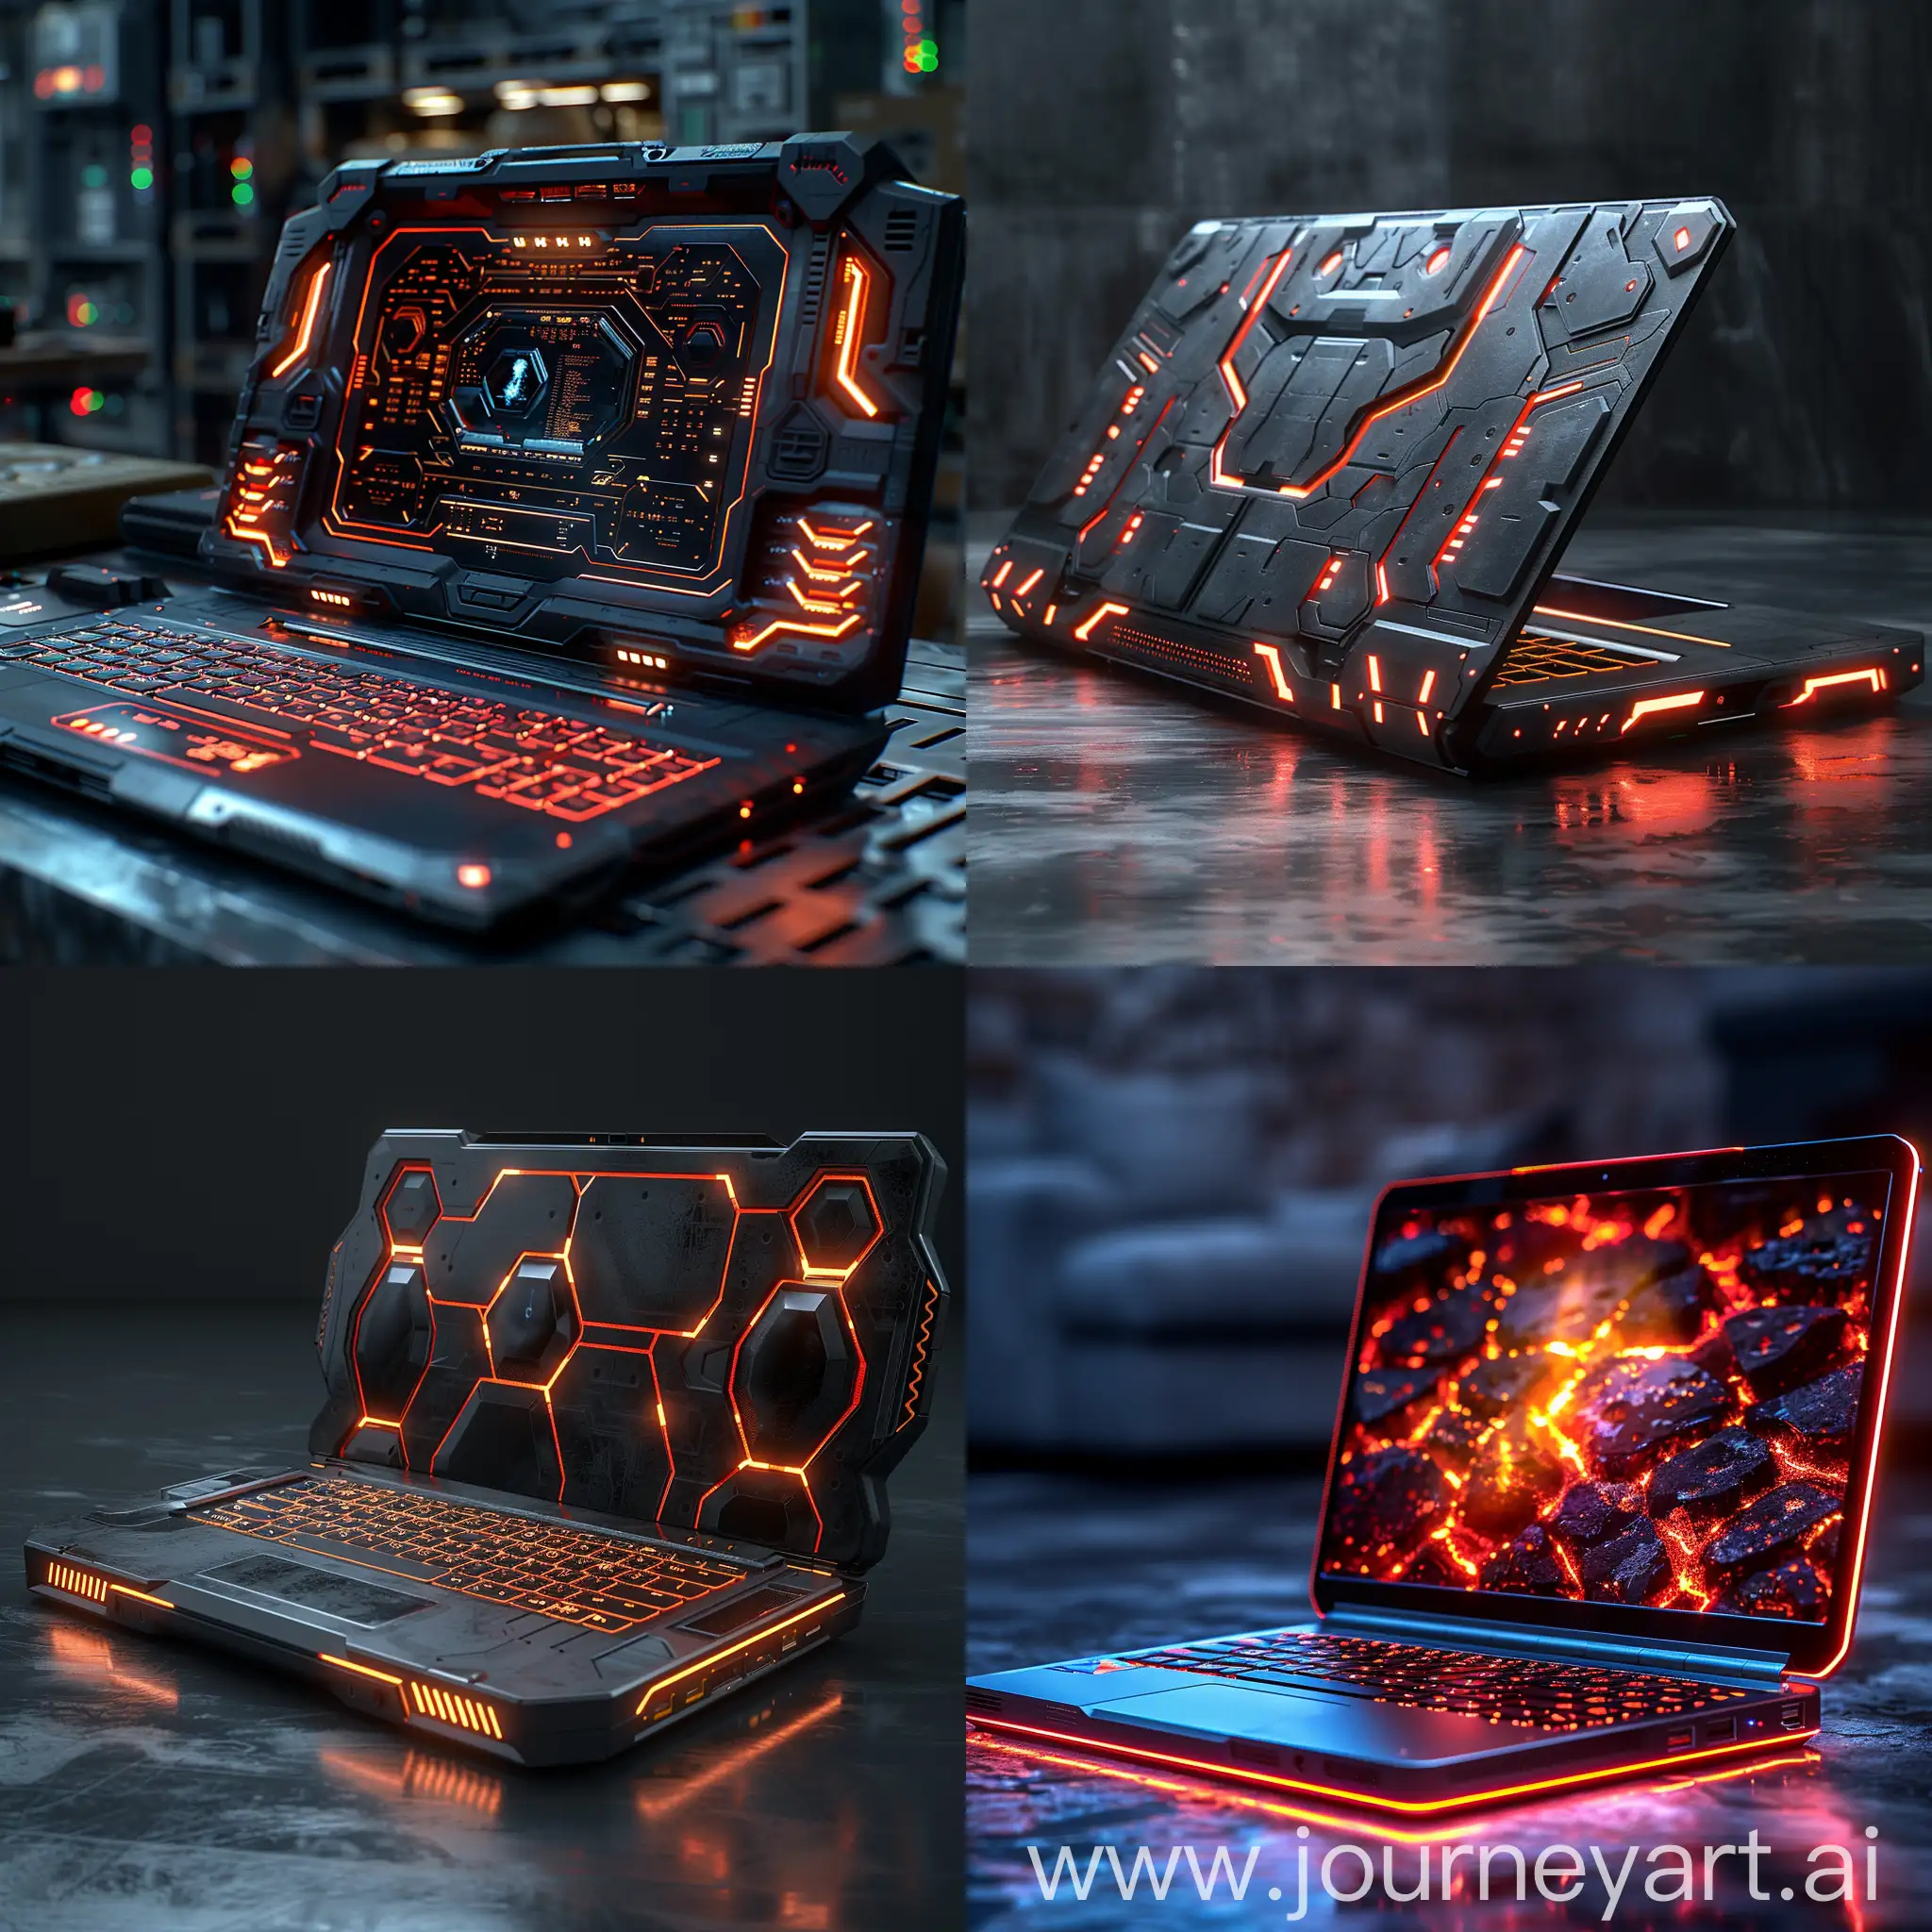 Futuristic-UltraModern-Laptop-with-HeavyDuty-Materials-and-HighTech-Design